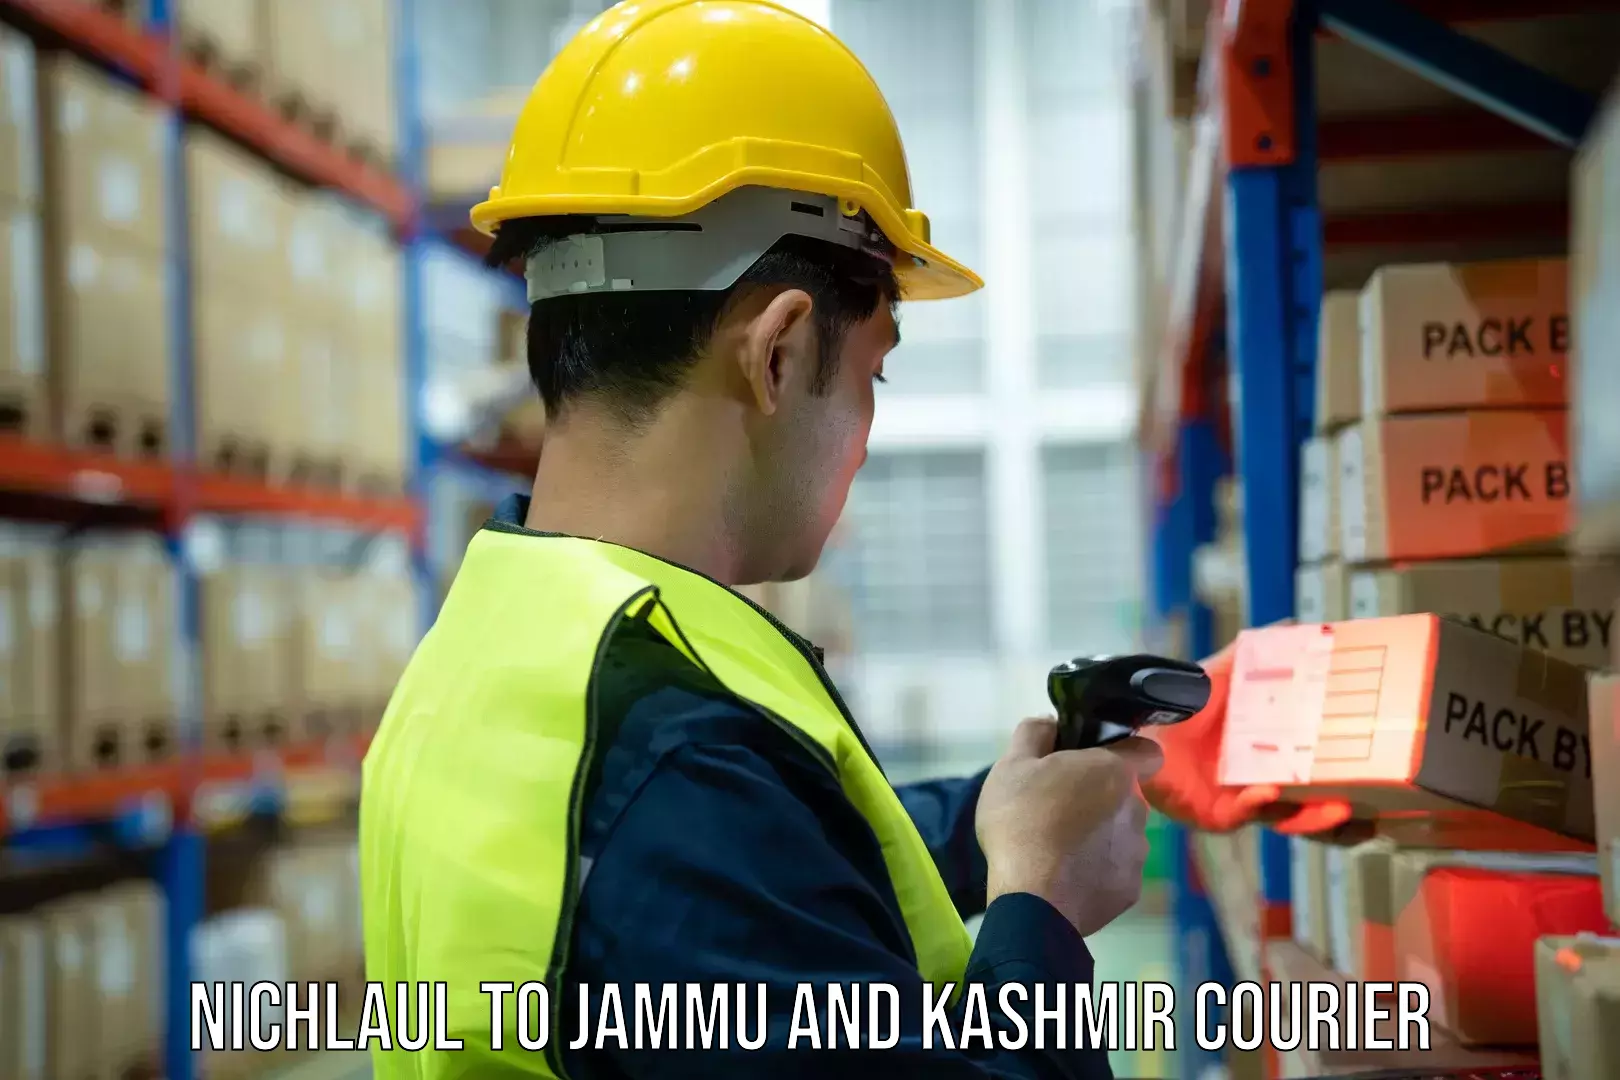 Local delivery service Nichlaul to Jammu and Kashmir